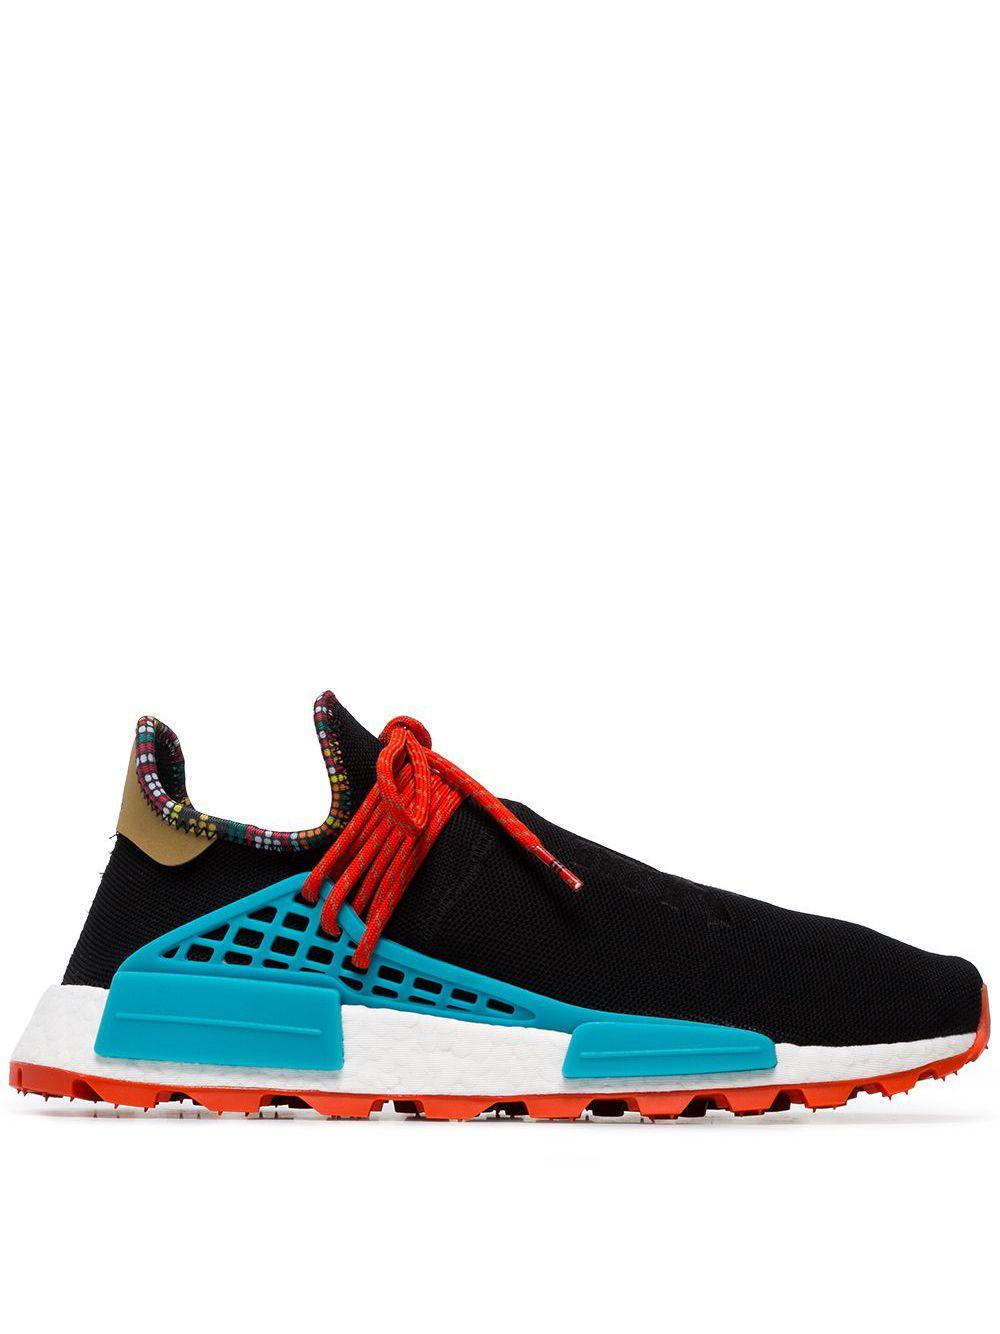 adidas Synthetic X Pharrell Williams Human Body Nmd Sneakers in Black for  Men - Lyst